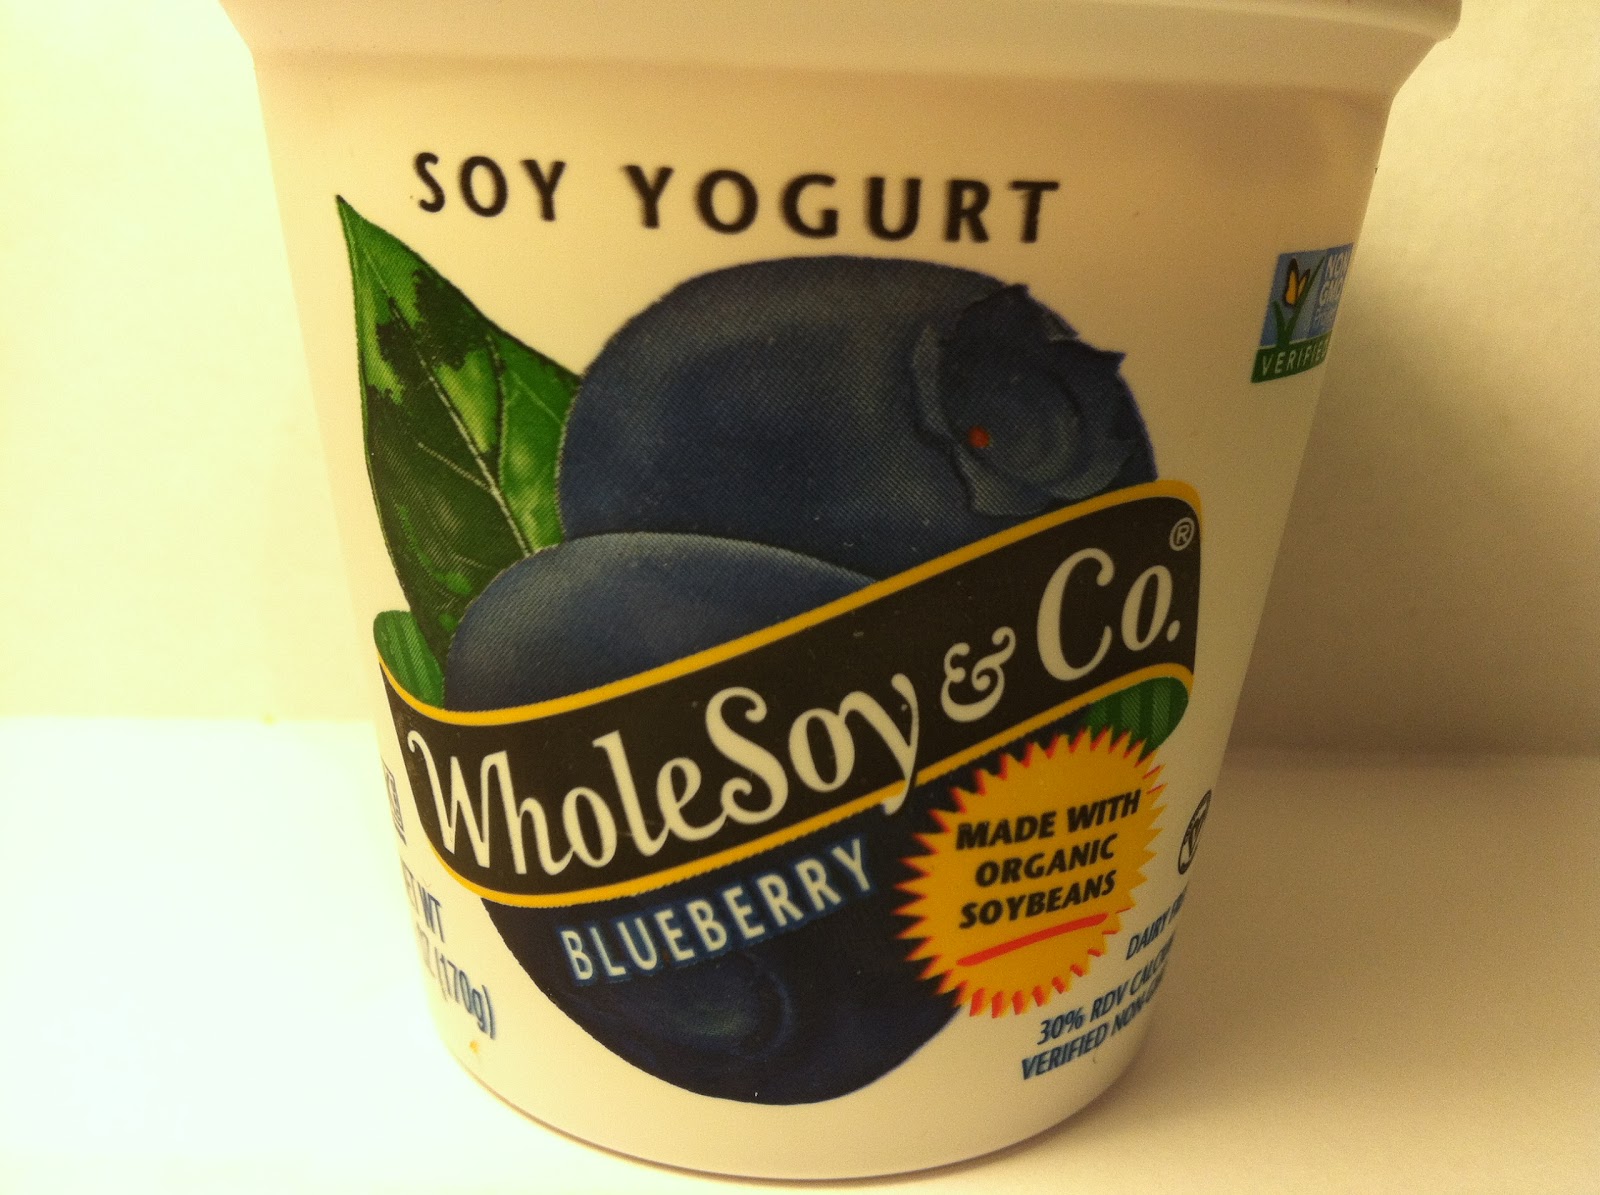 What Can I Substitute For Soy Yogurt